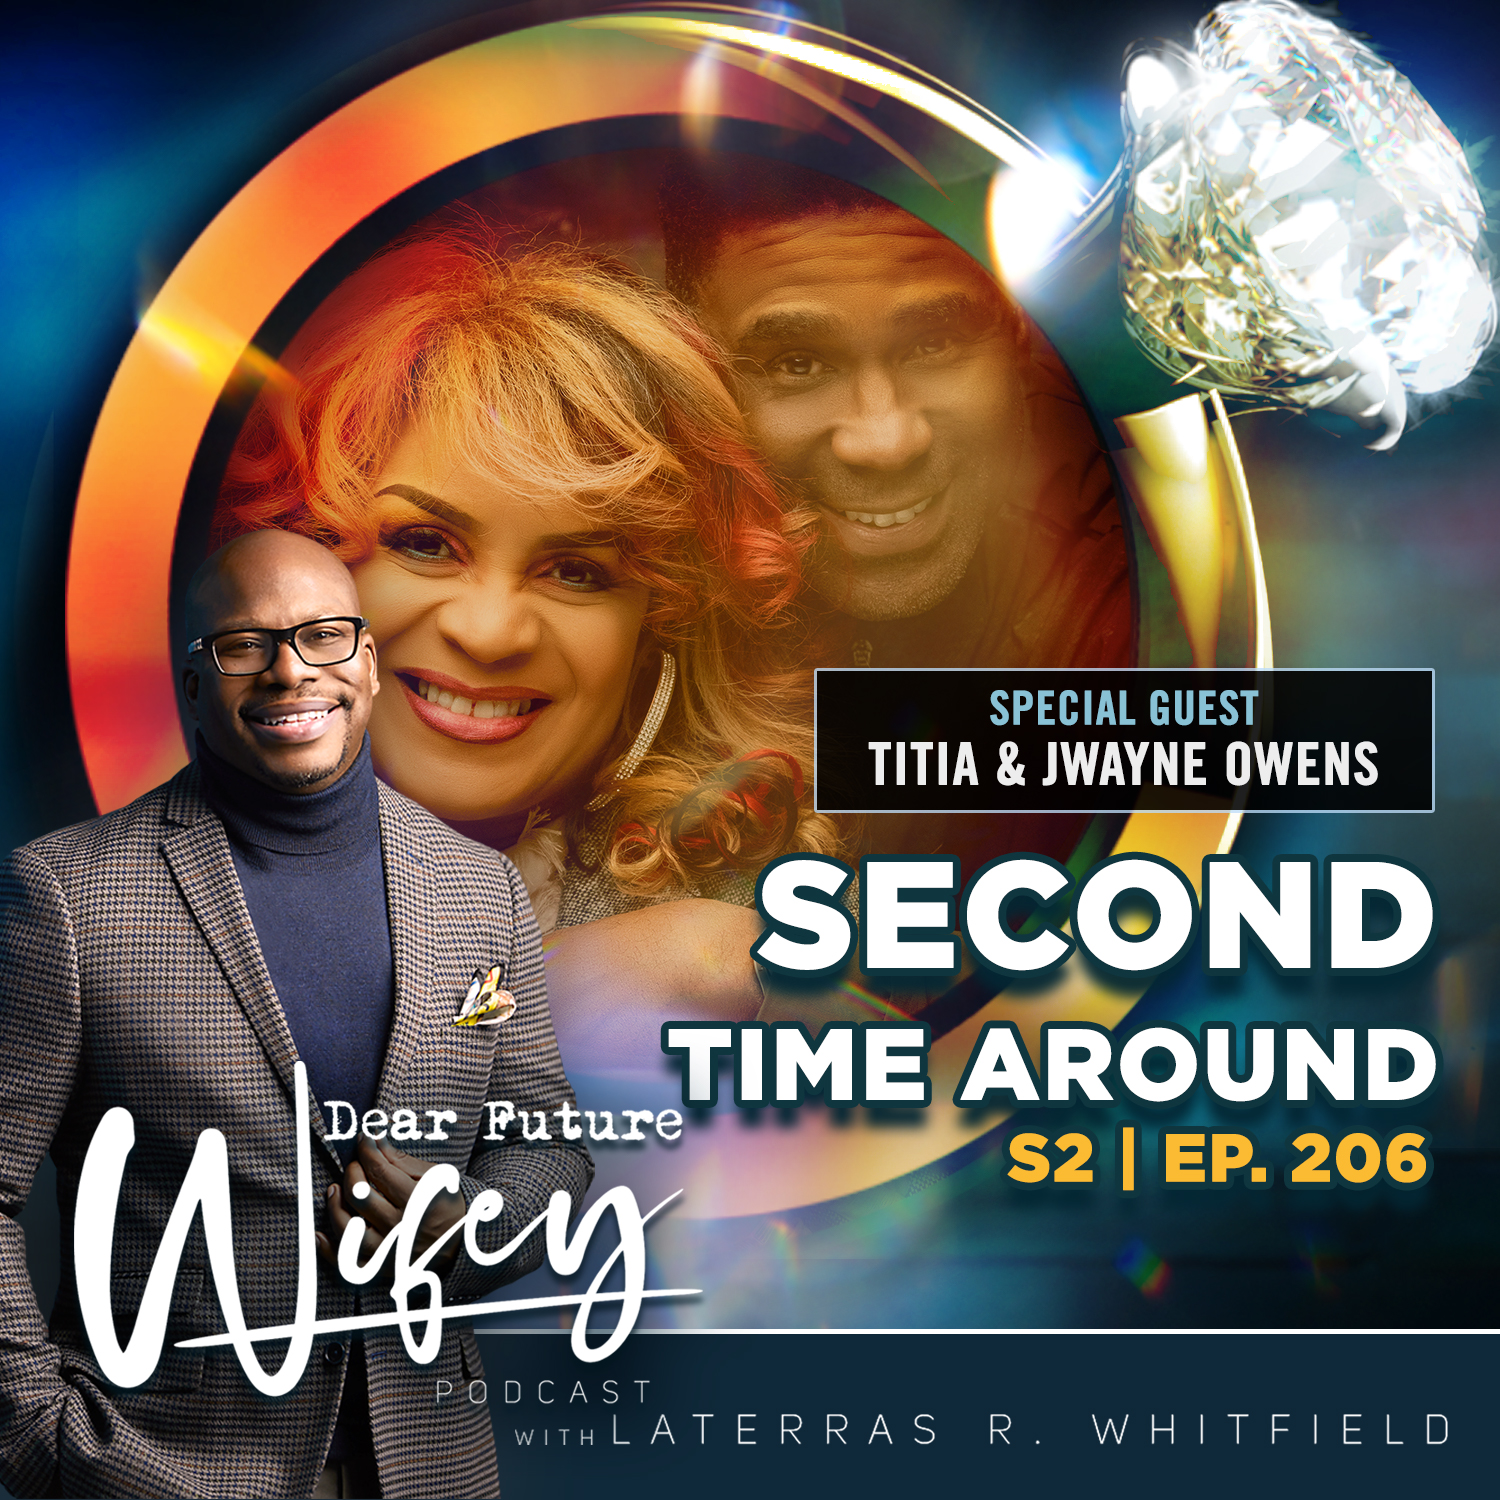 Second Chance Around (Guests: Titia & JWayne Owens)